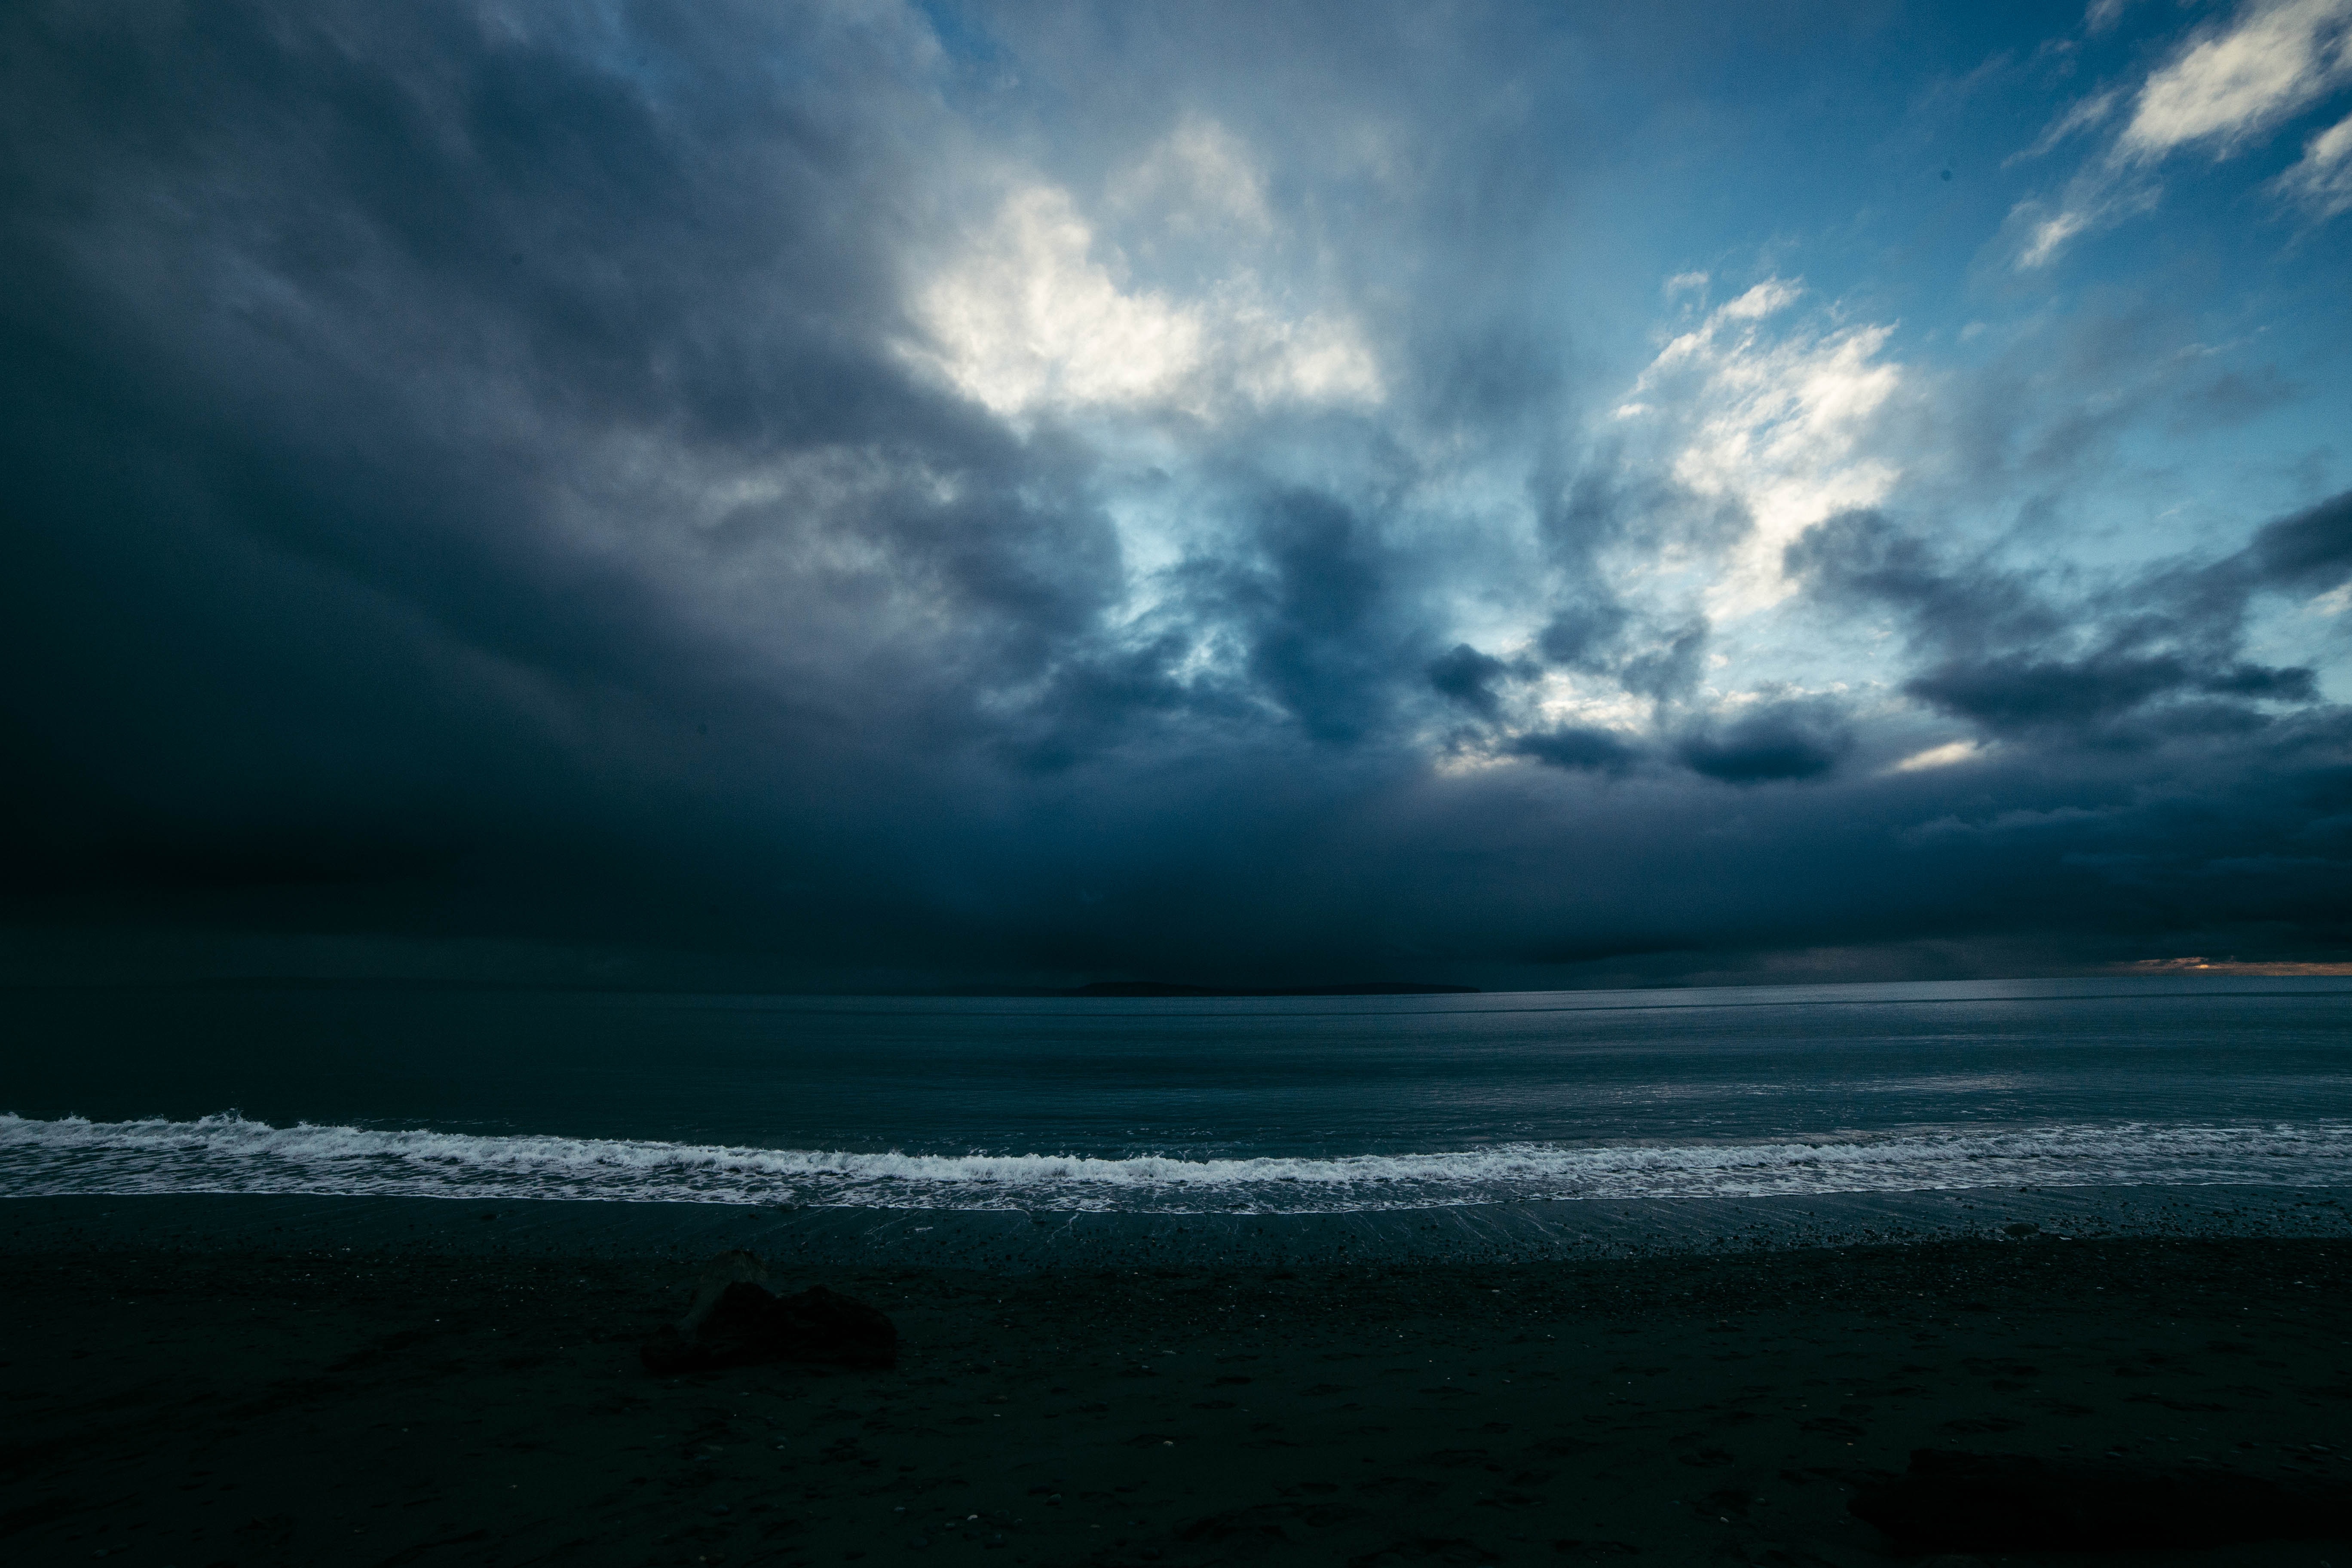 mainly cloudy, overcast, sea, nature, night, shore, bank, surf cellphone